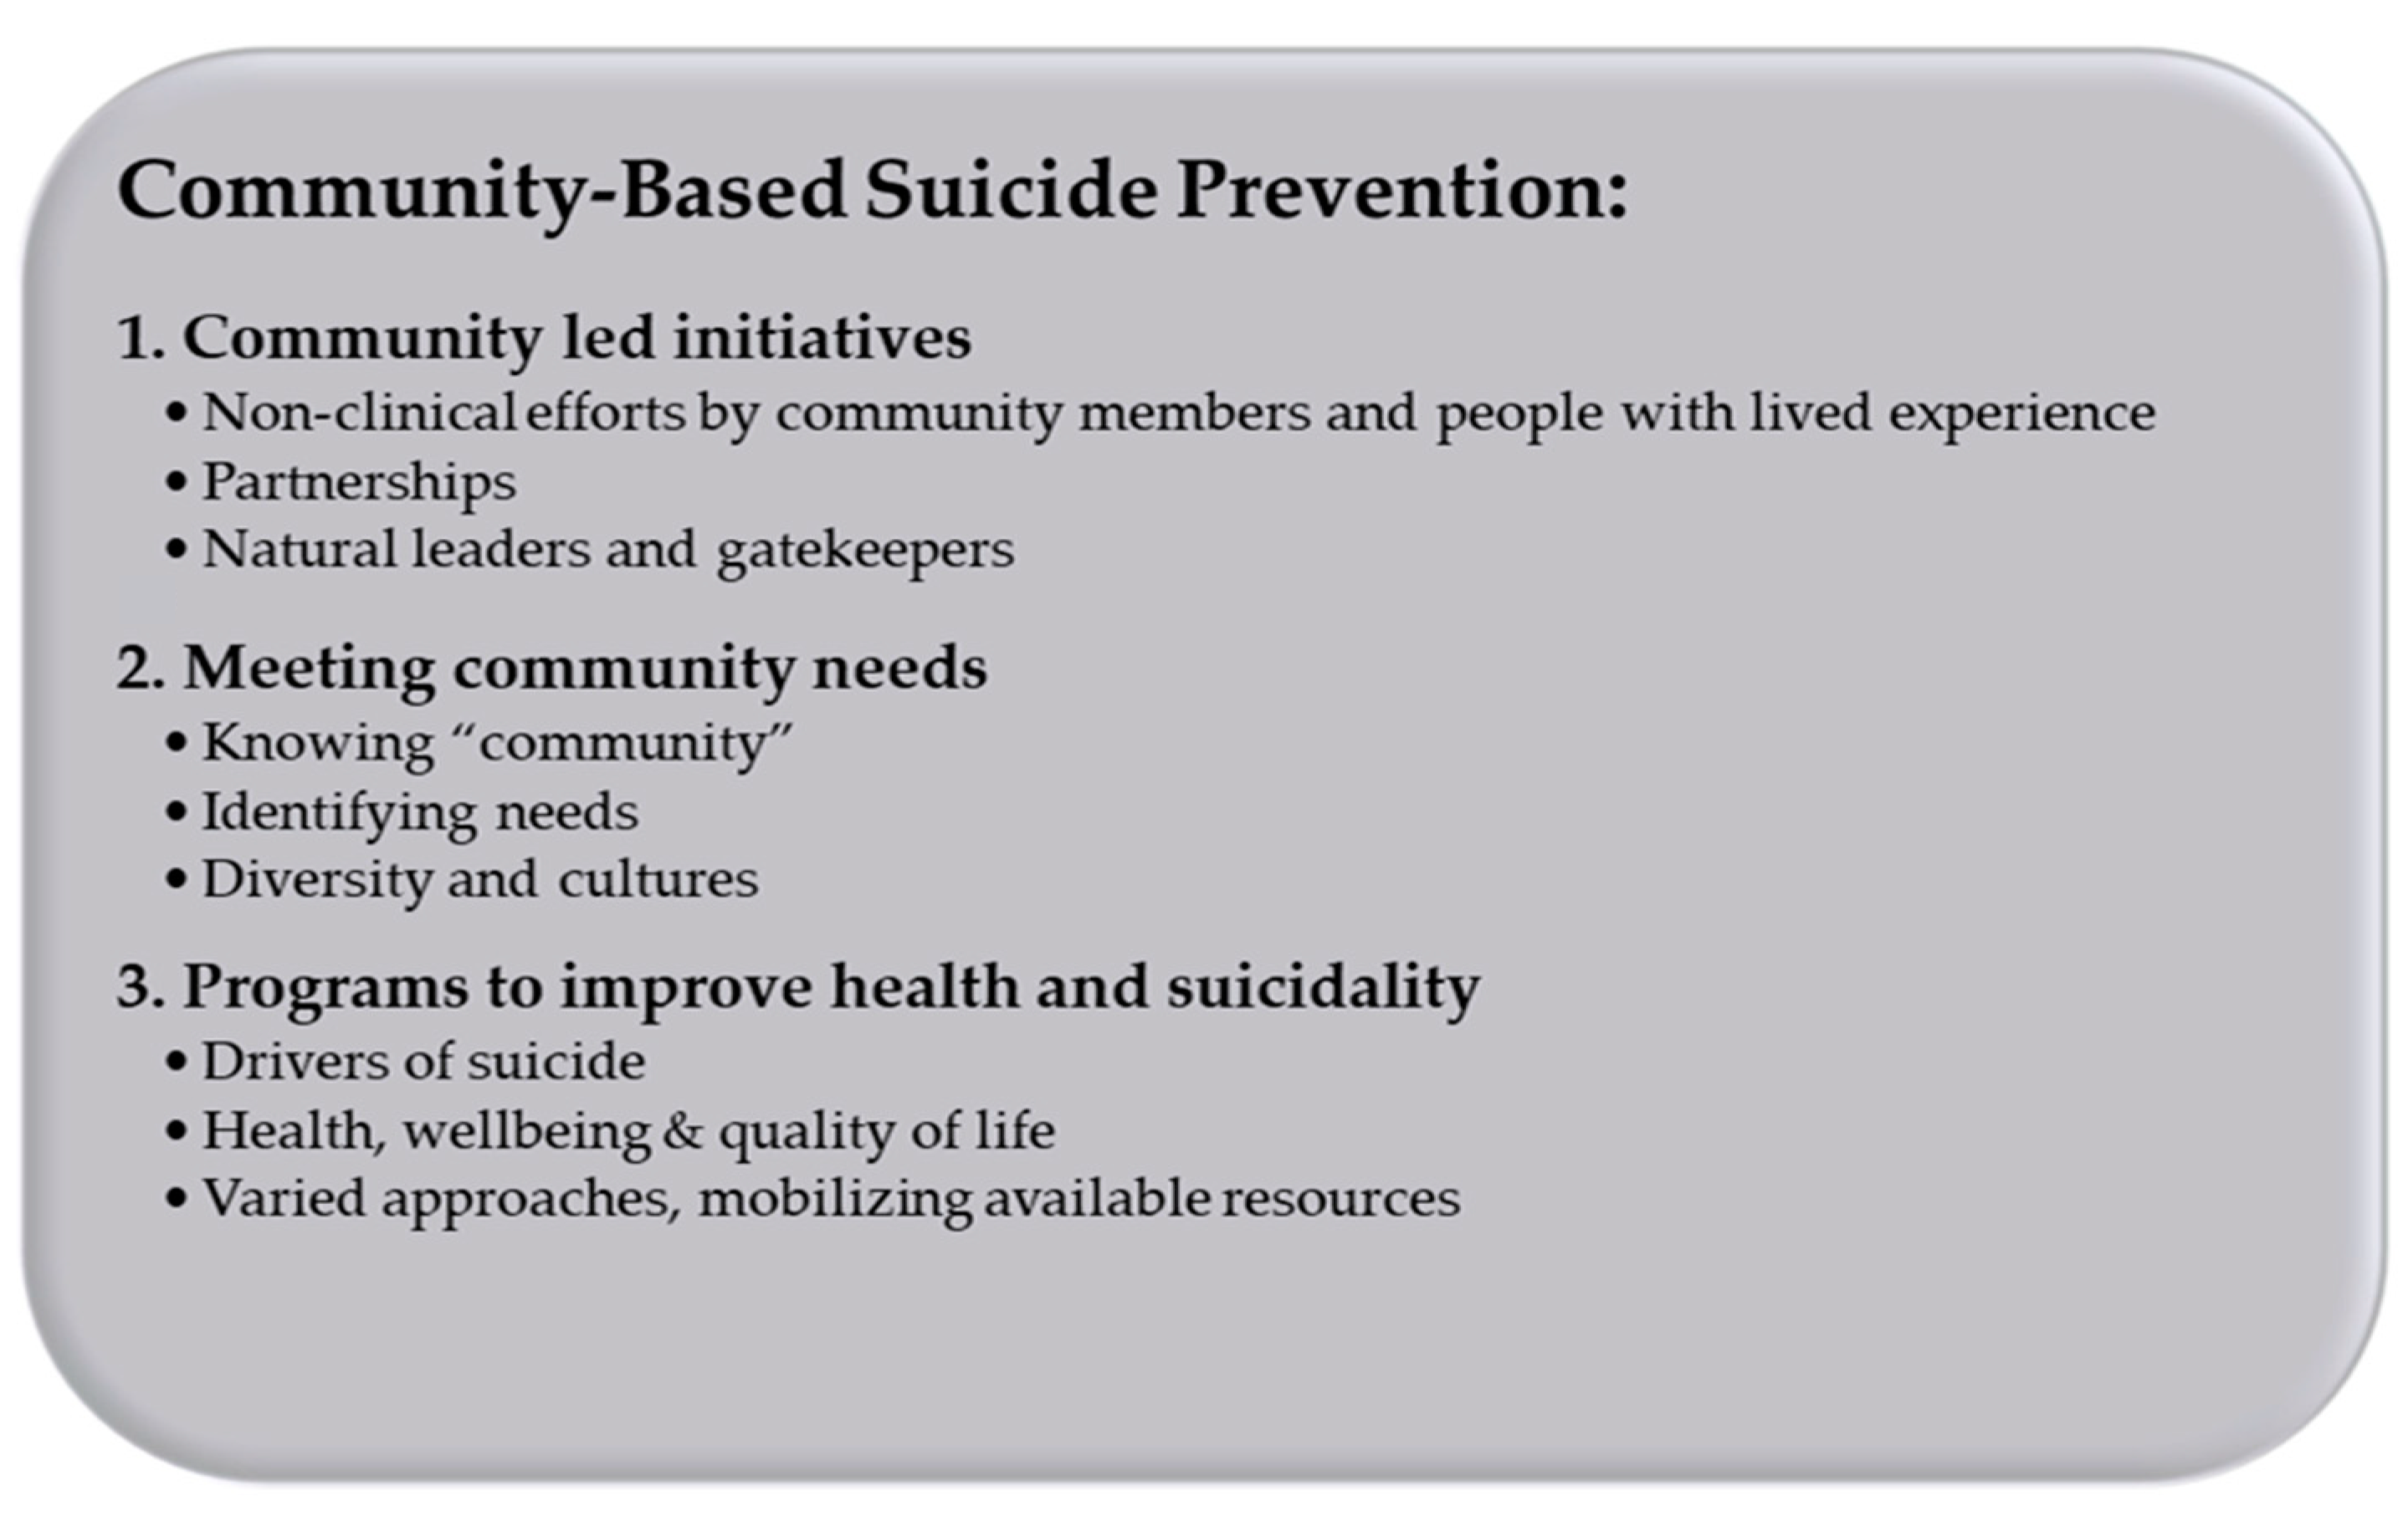 Full article: The adaptation of a community-based suicide